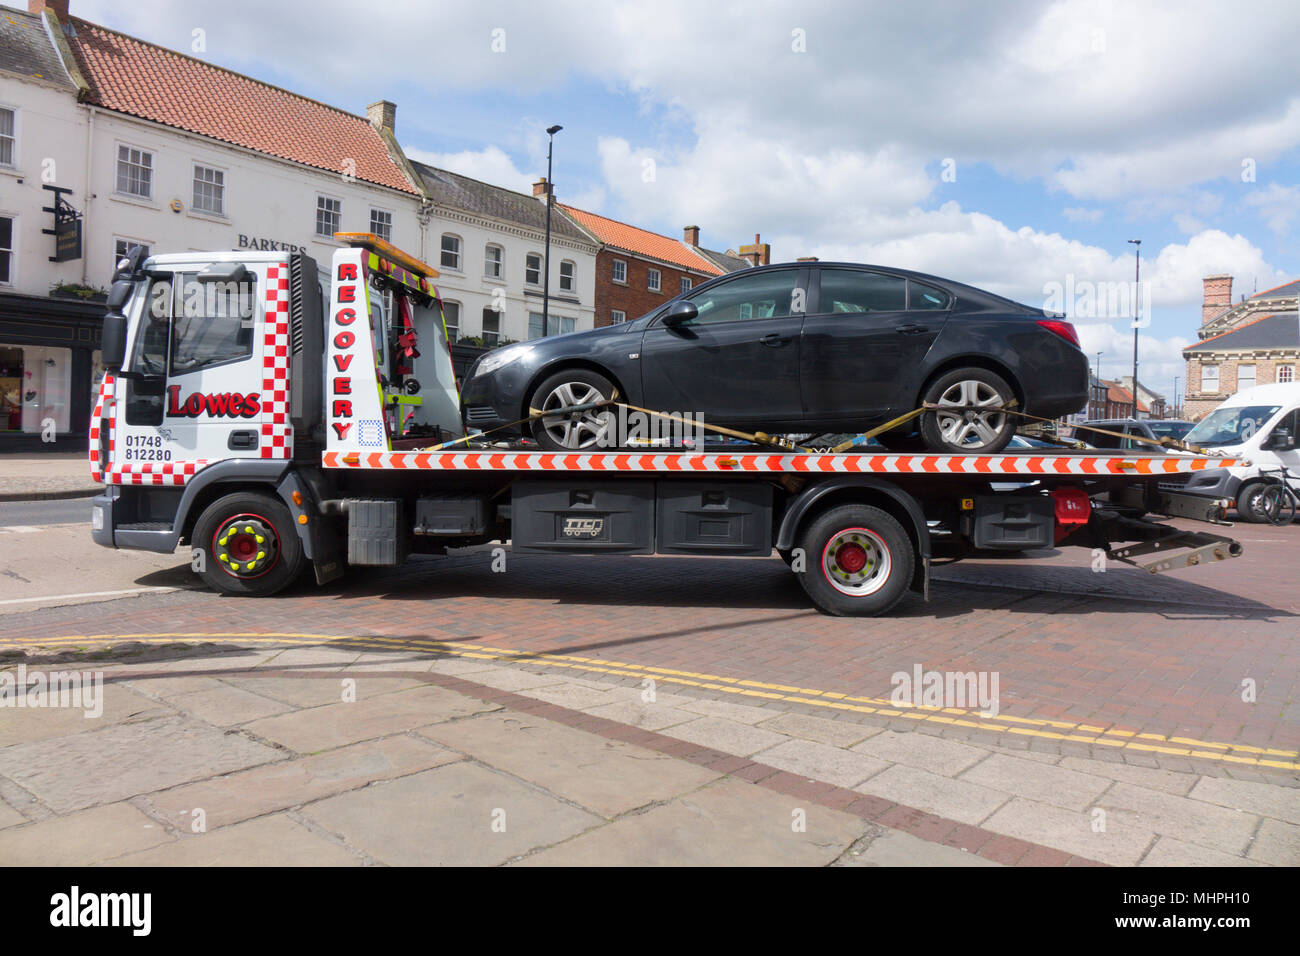 Vehicle breakdown a Vauxhall Insignia automobile being removed by a recovery vehicle from Lowes Recovery Stock Photo